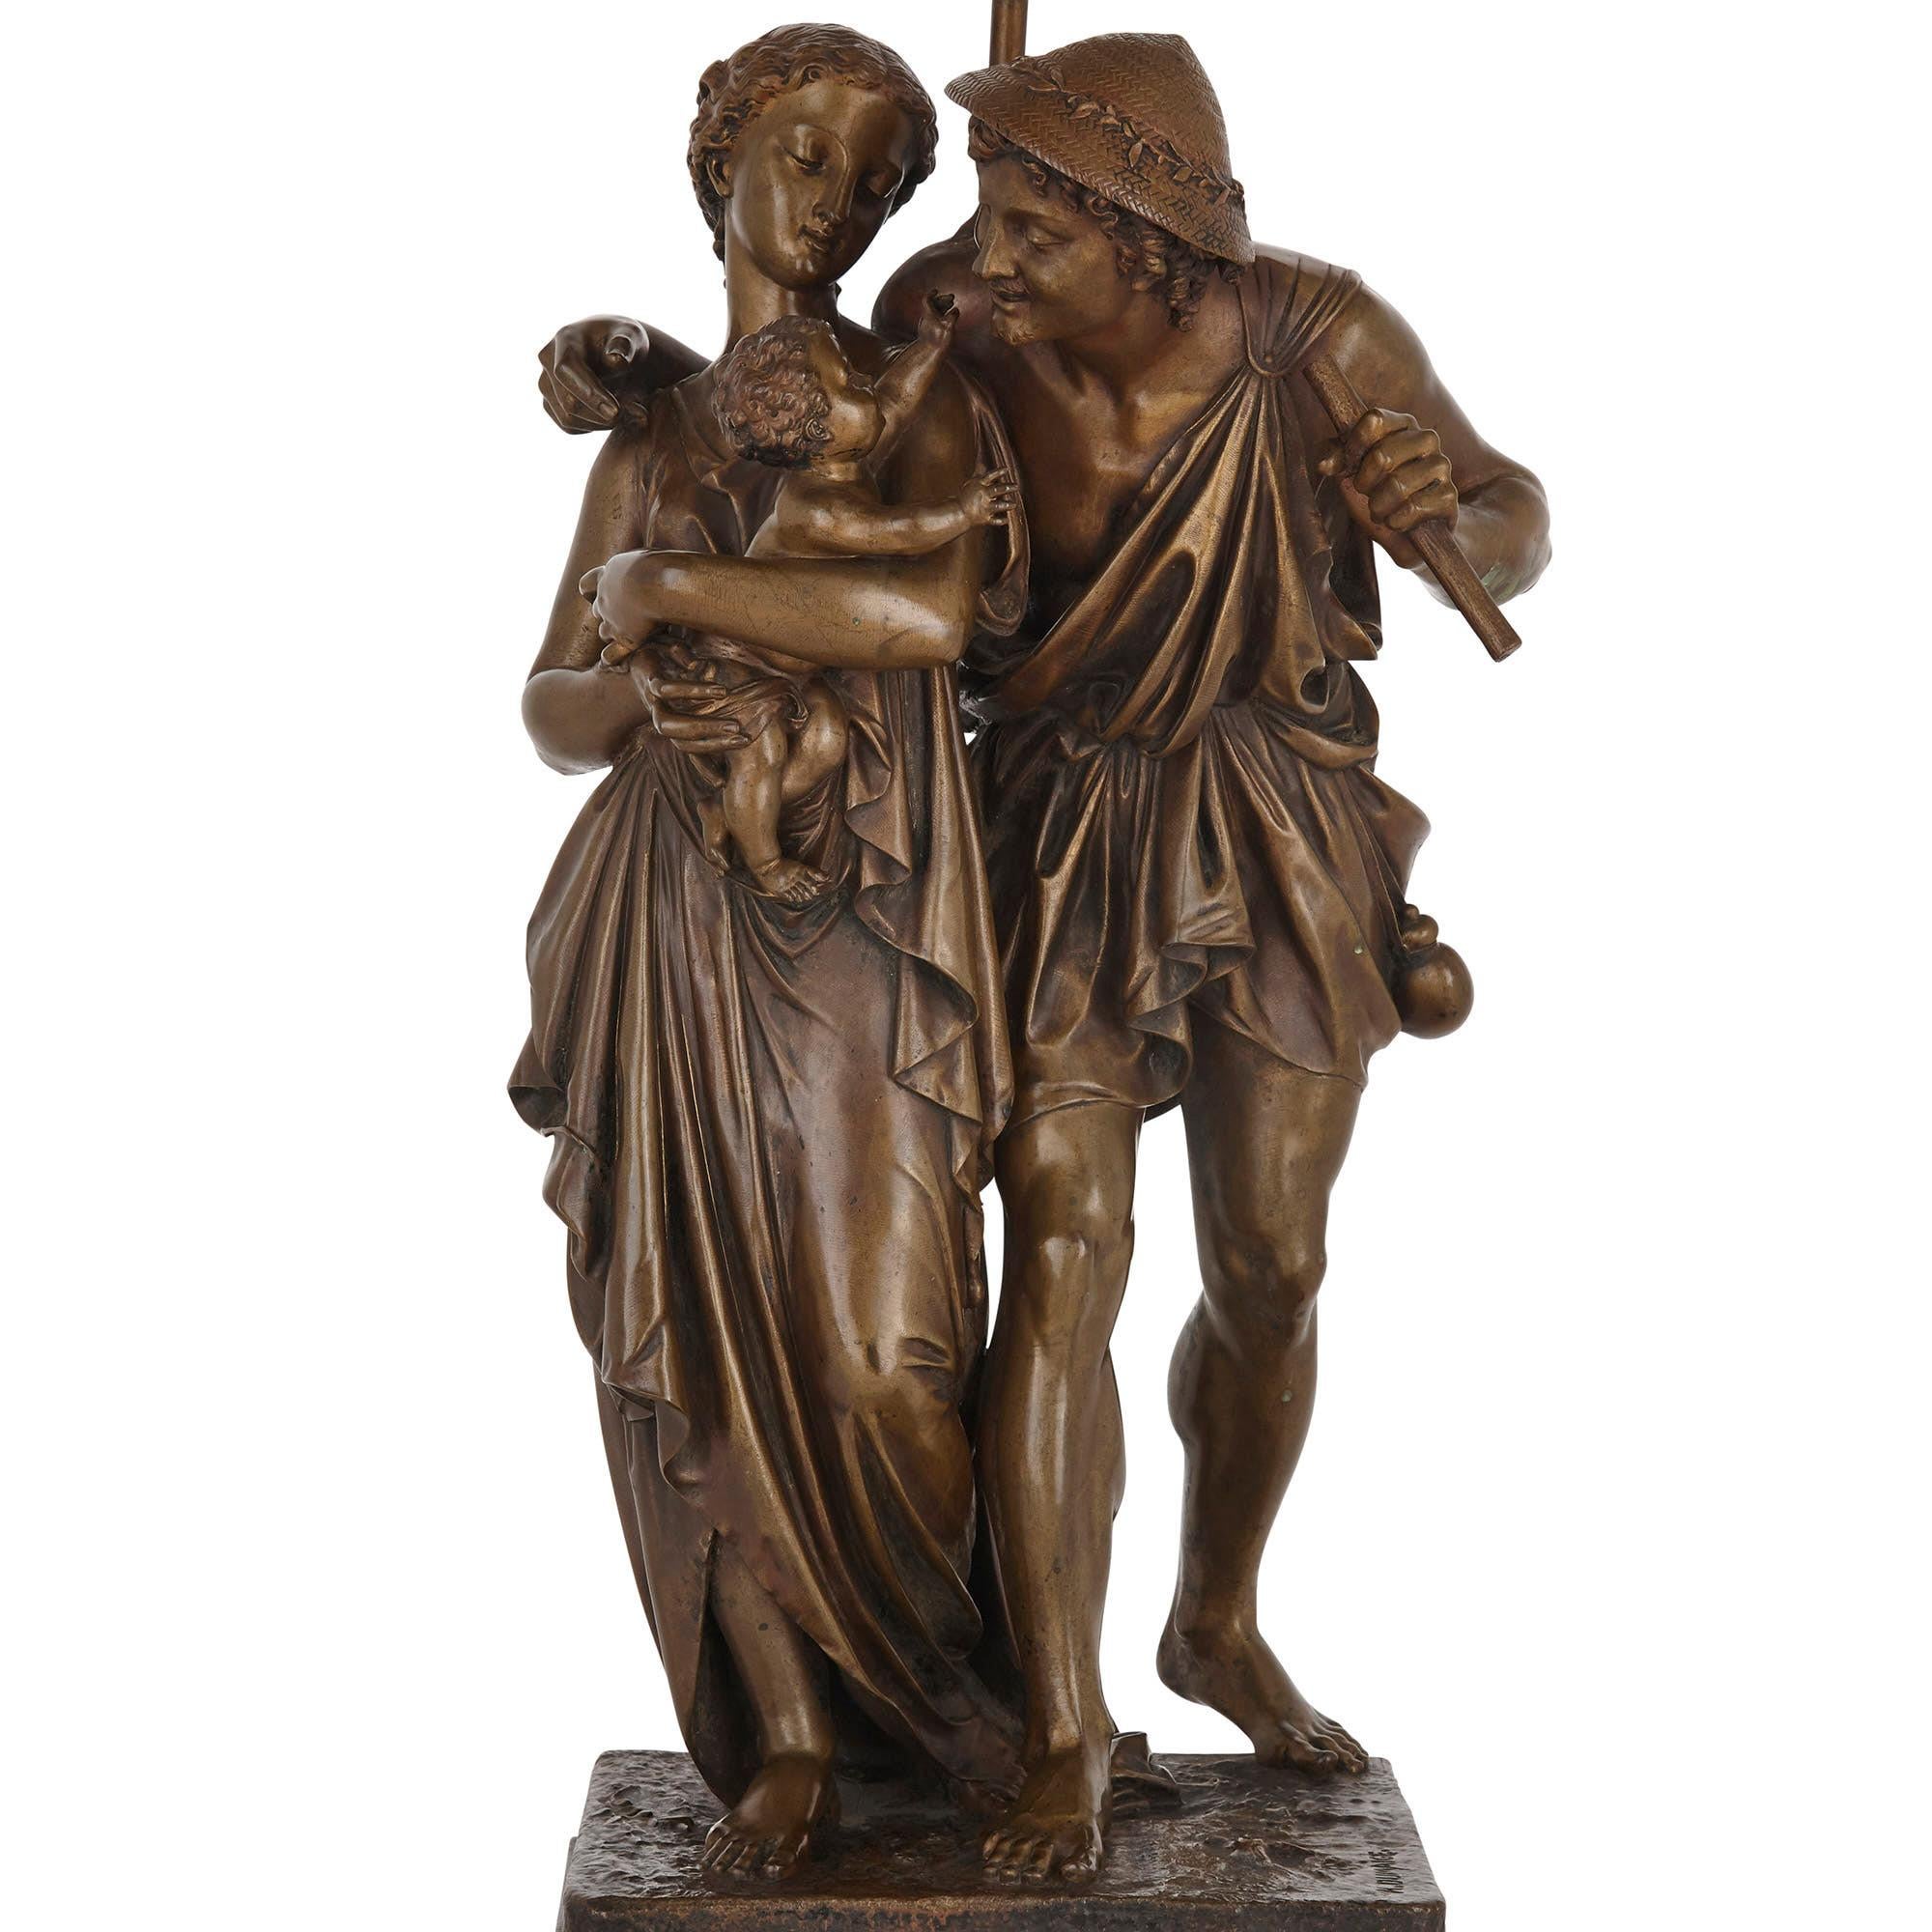 Bronze sculptural lamp by Henry Étienne Dumaige
French, 19th century
Measures: Height 69cm, width 28cm, depth 23cm

This fine figurative lamp is by Étienne Henry Dumaige, a celebrated Parisian sculptor of the 19th century. The lamp features a